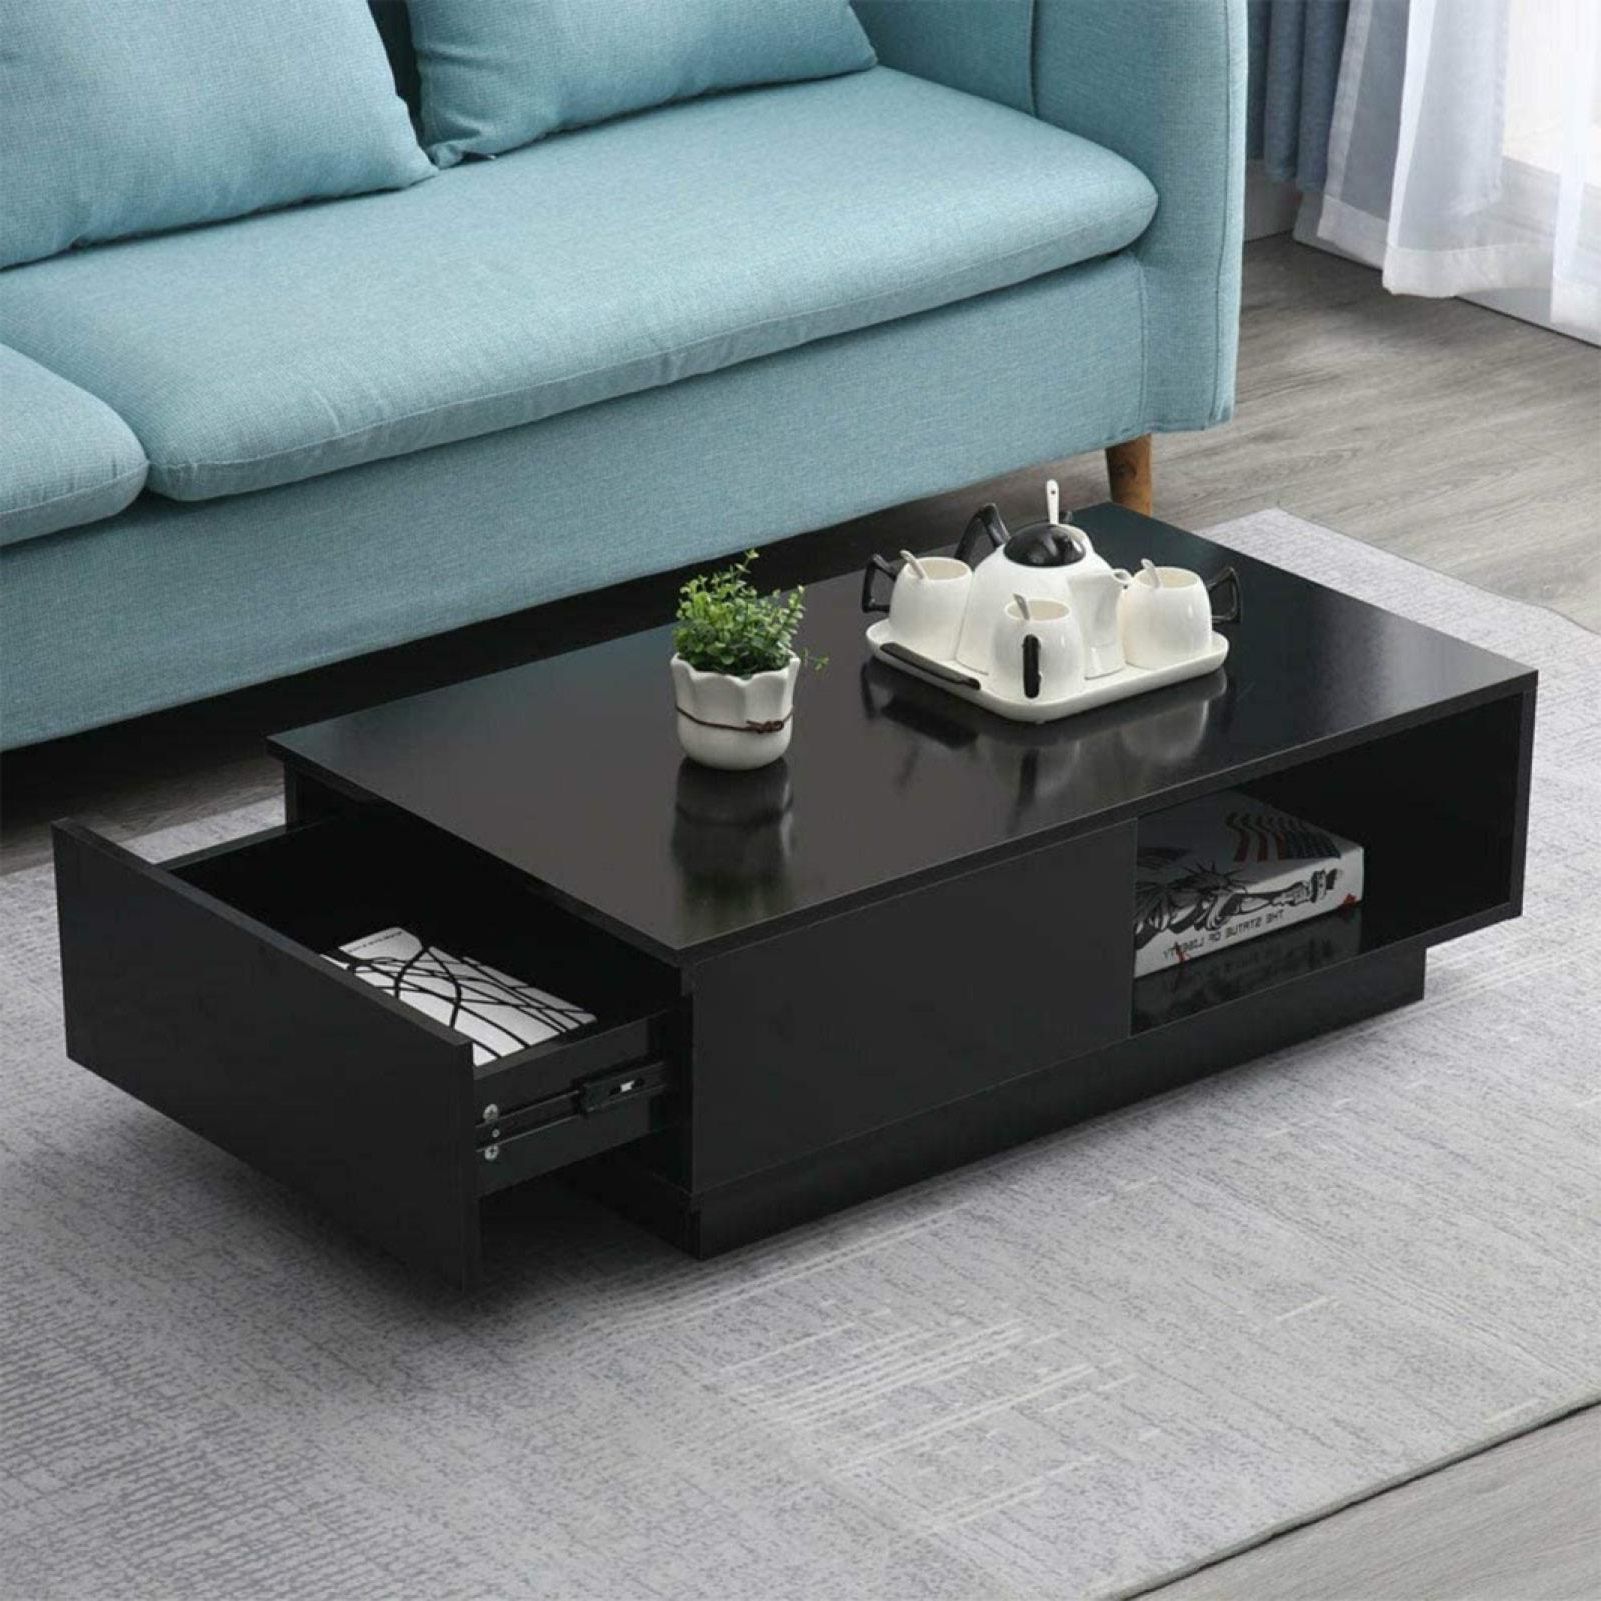 Coffee Tables With Drawers And Led Lights Within Well Known High Gloss Coffee Table With Storage Drawers Rgb Led Modern Living Room (View 8 of 15)